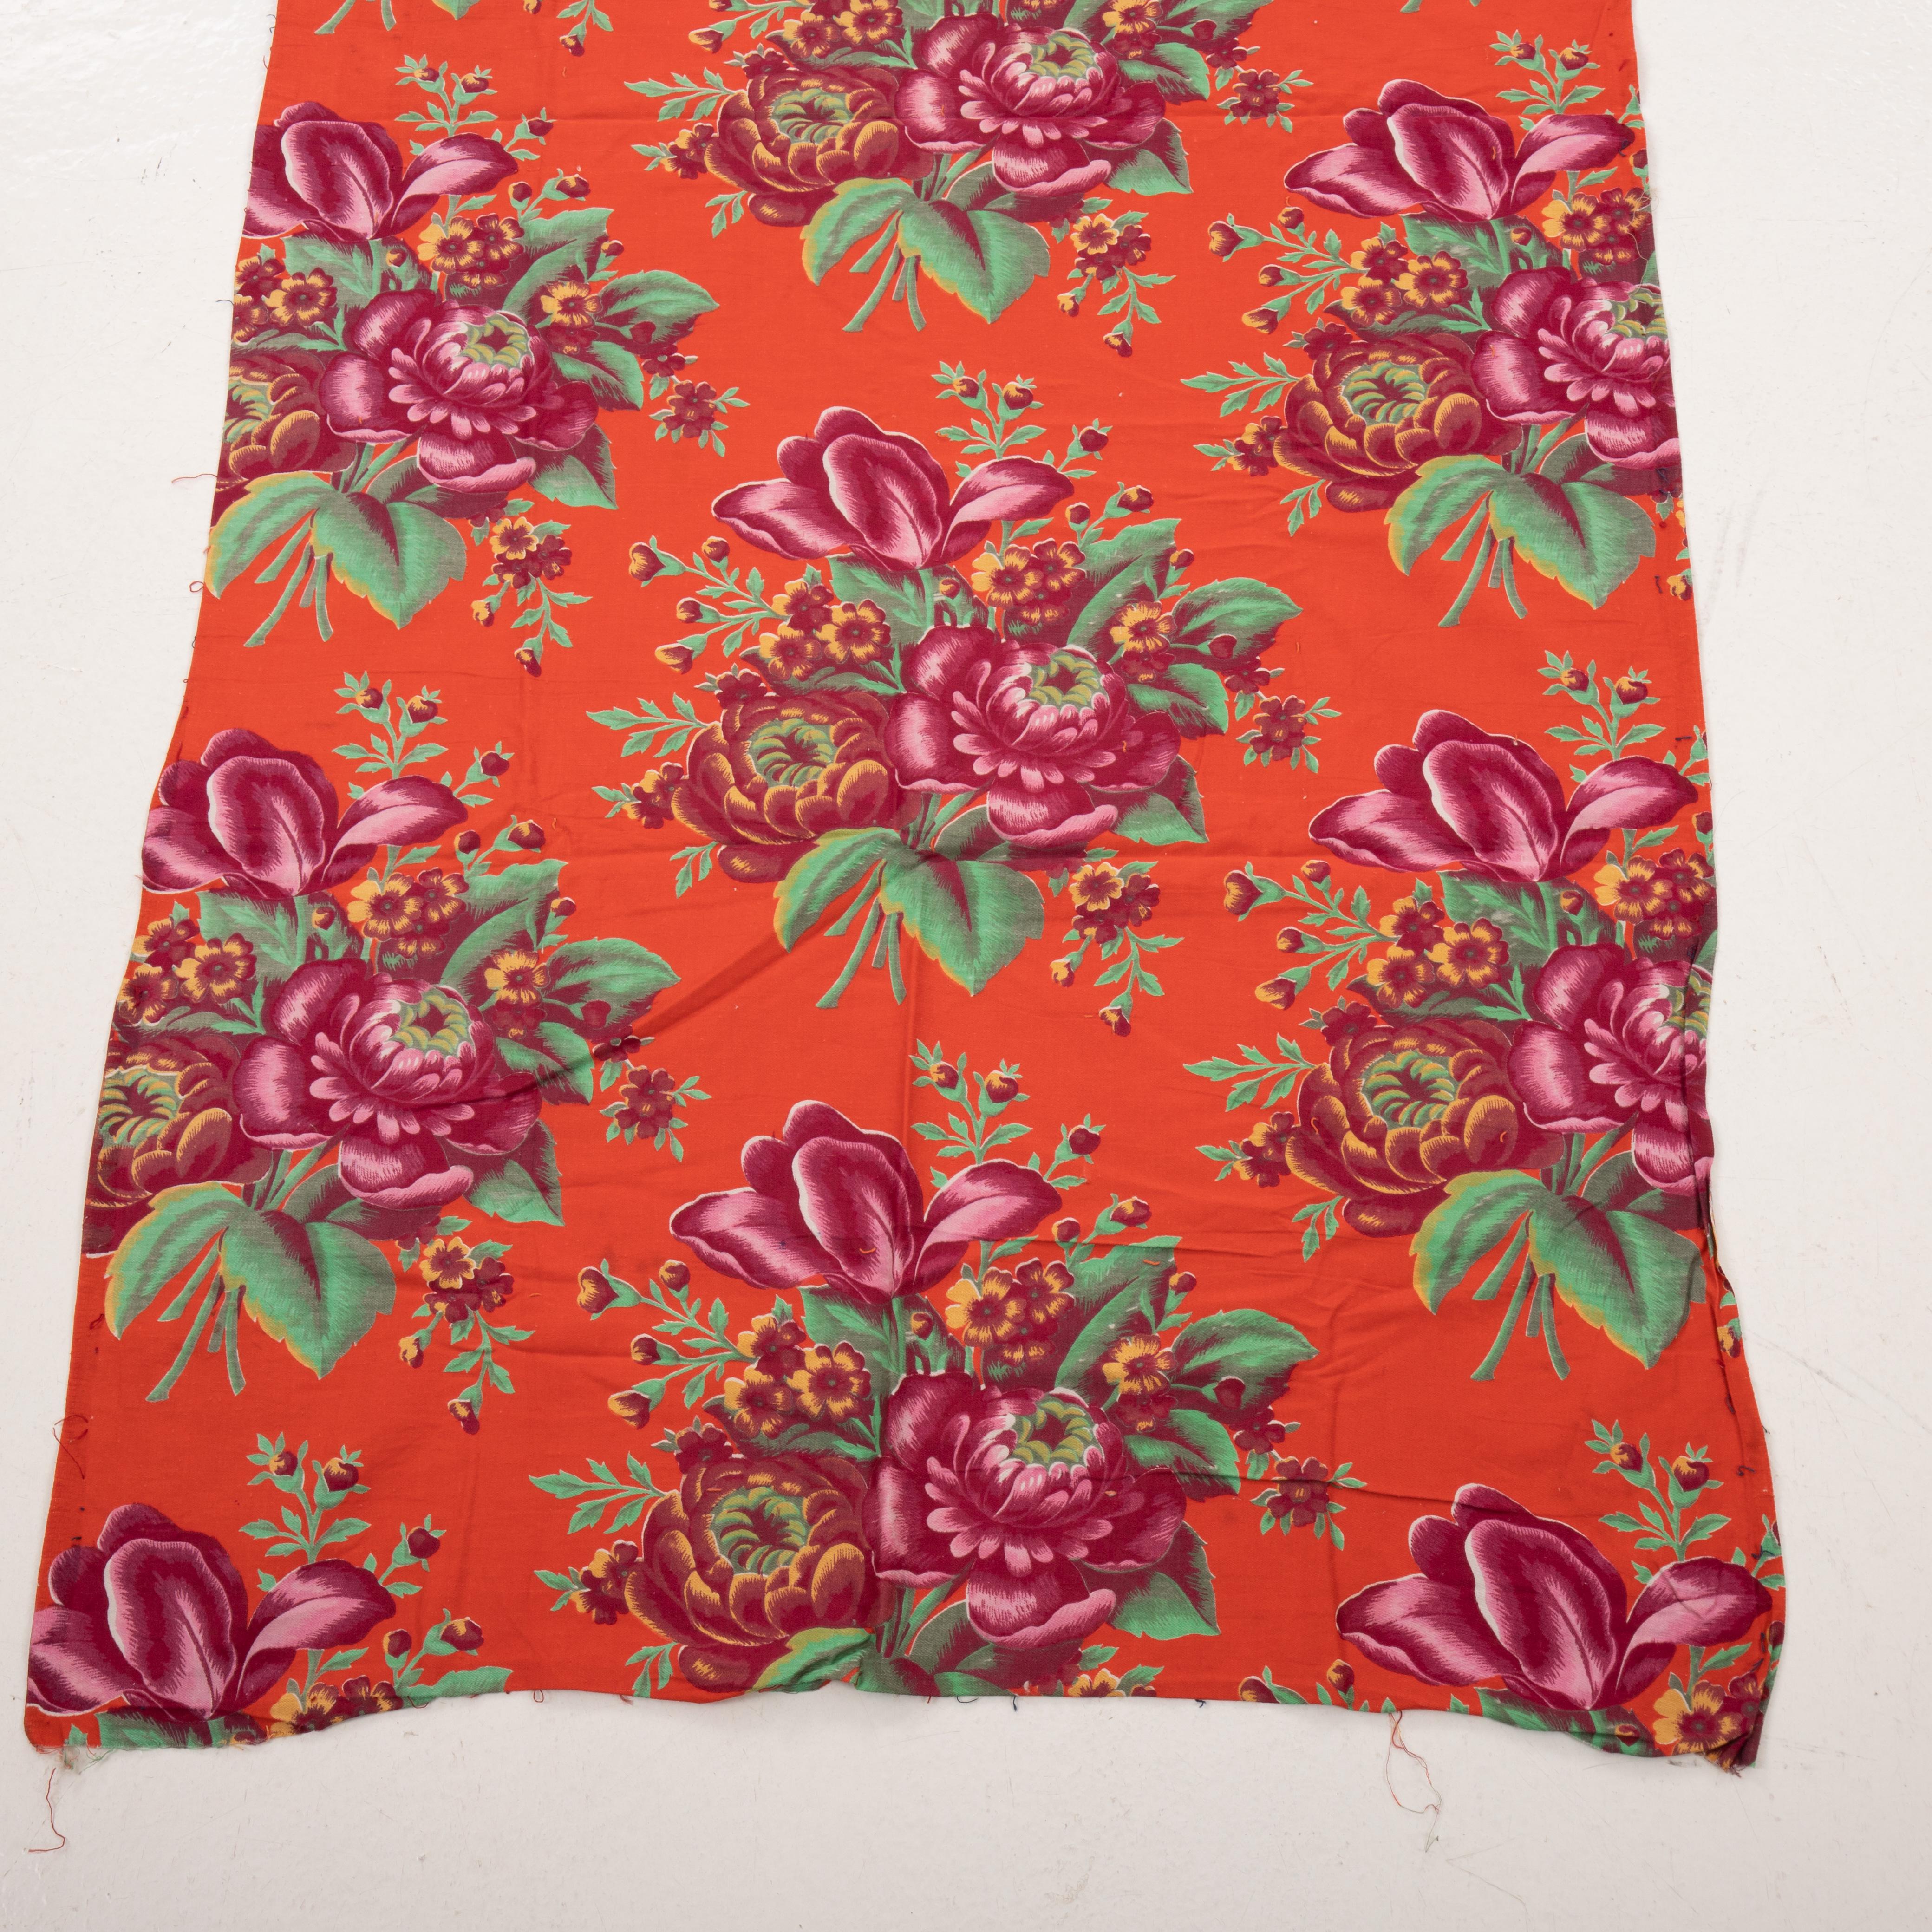 Woven Roller Printed Cotton Panel, Made for Central Asian Markets  Mid 20th C.  Russia For Sale